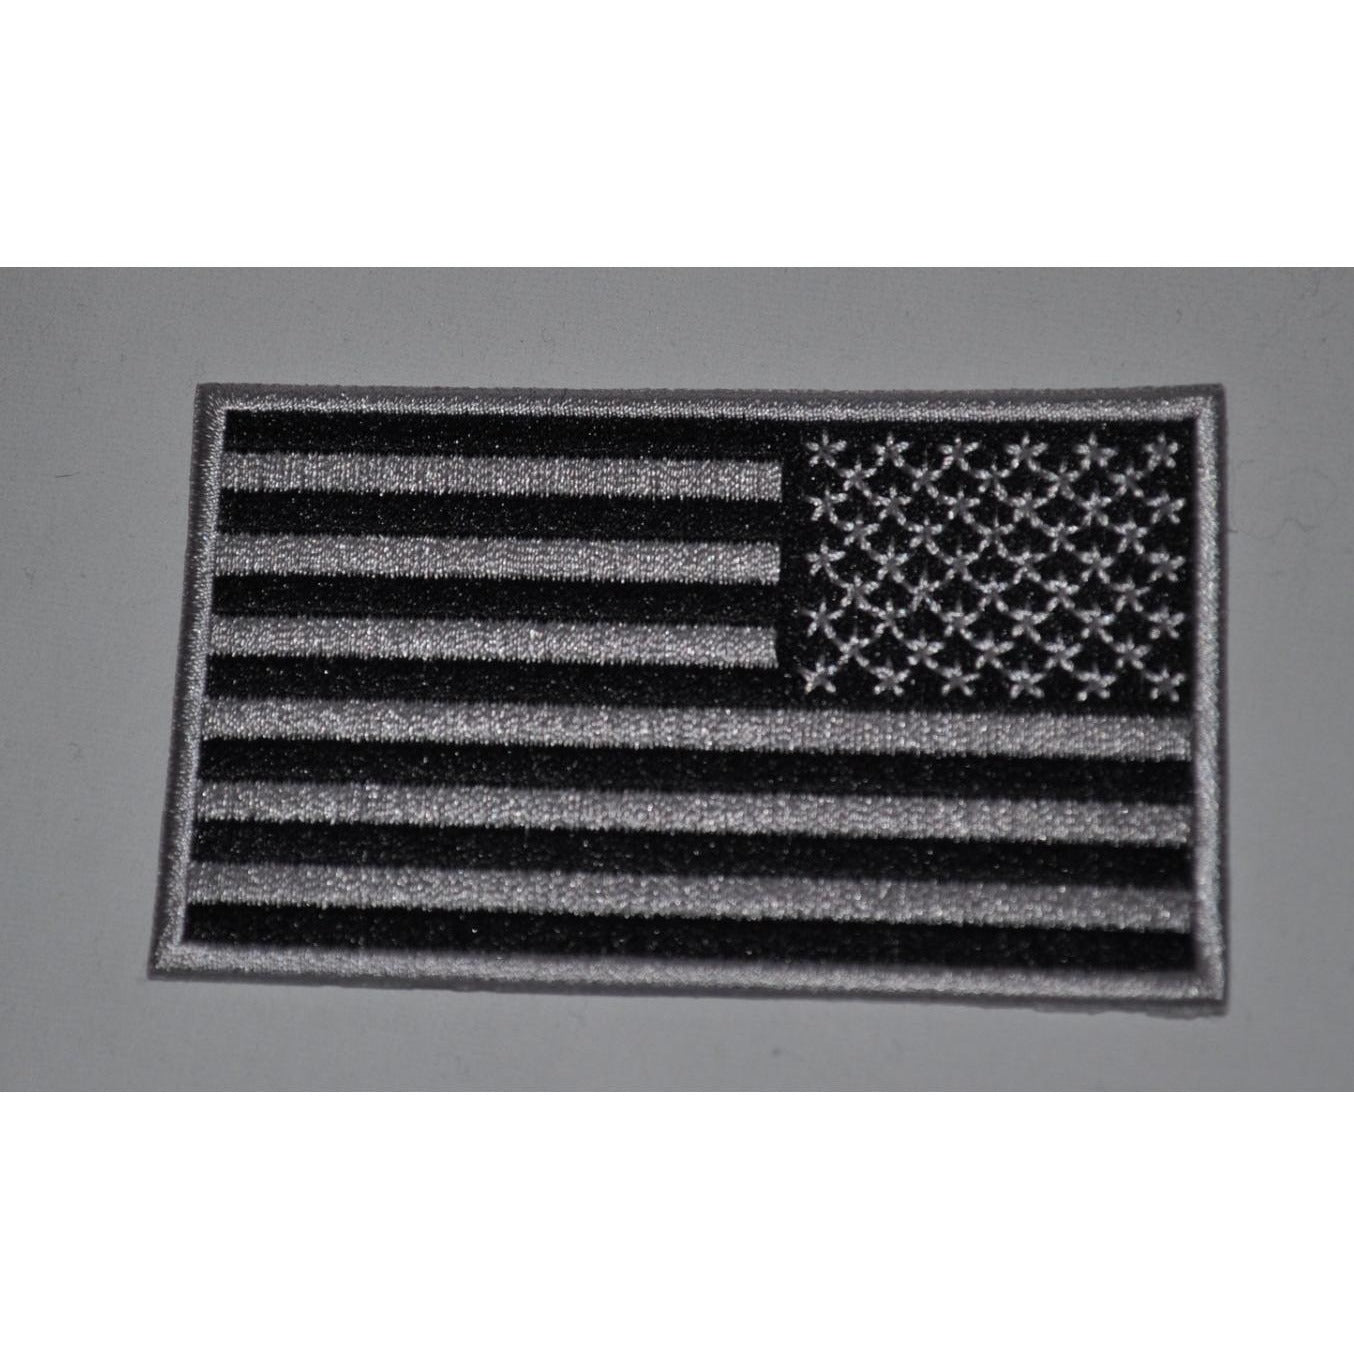 Black & Gray Reversed American Flag Patch